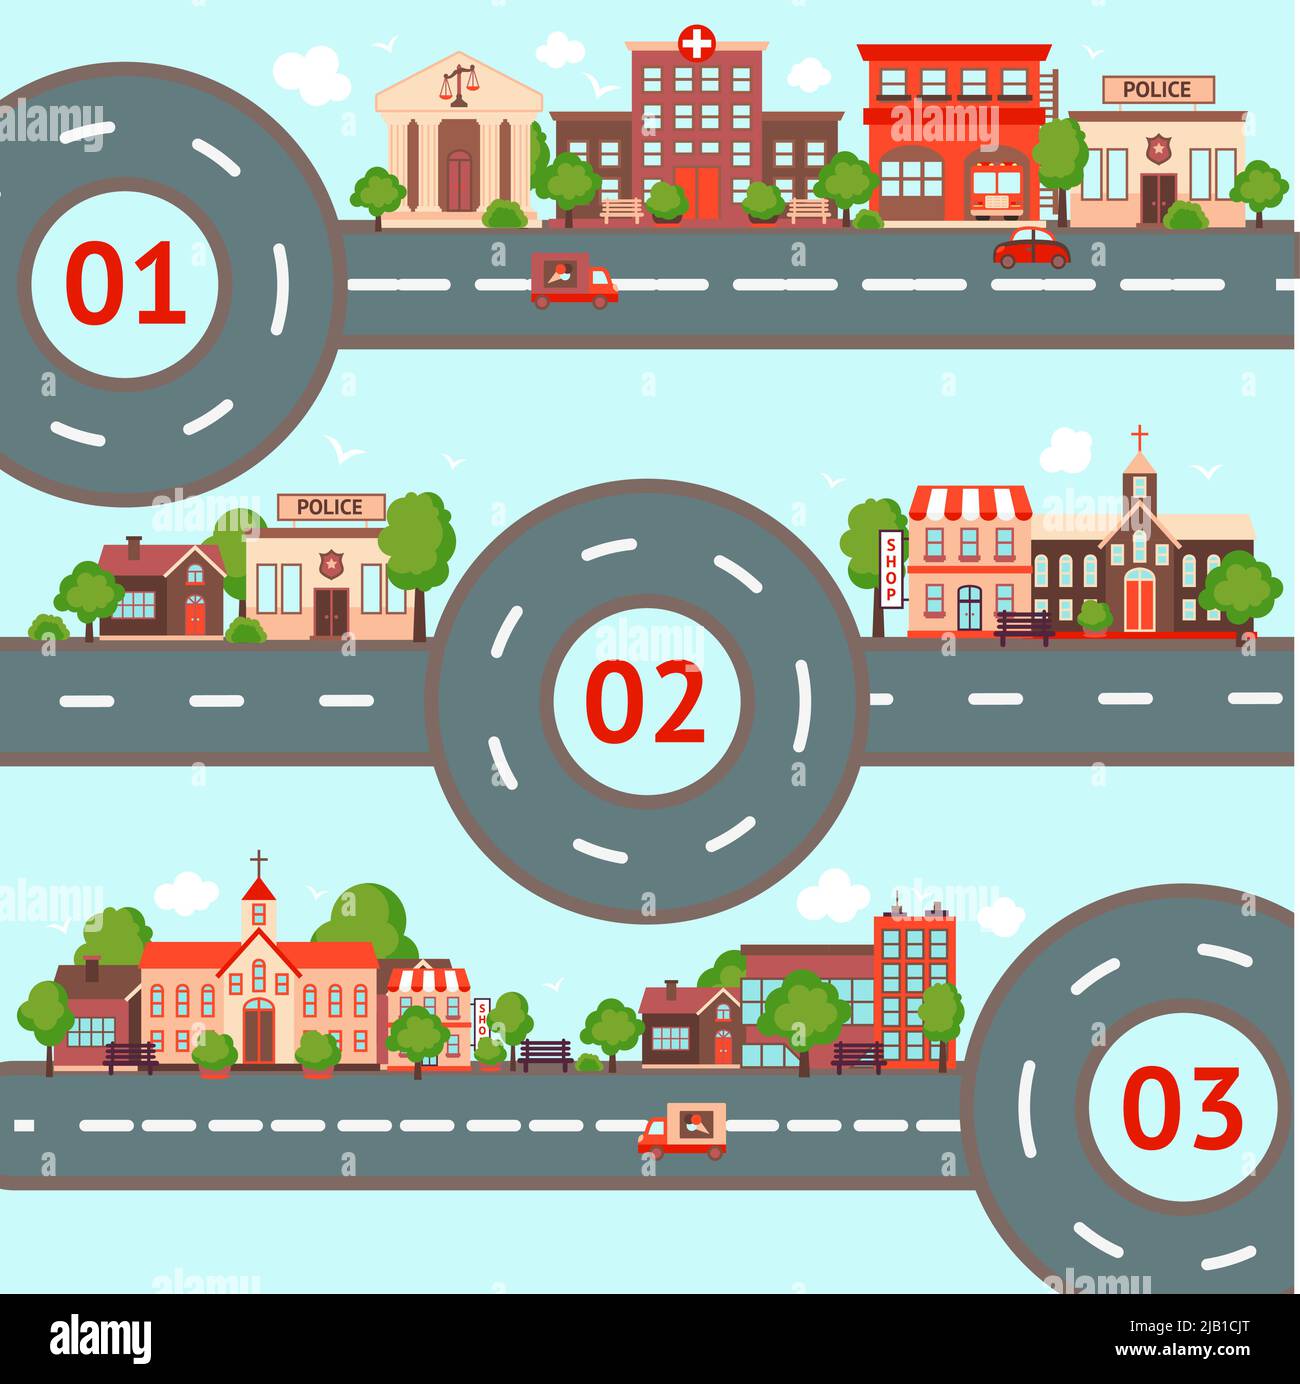 City streets roads infographic set with retro urban buildings vector illustration Stock Vector